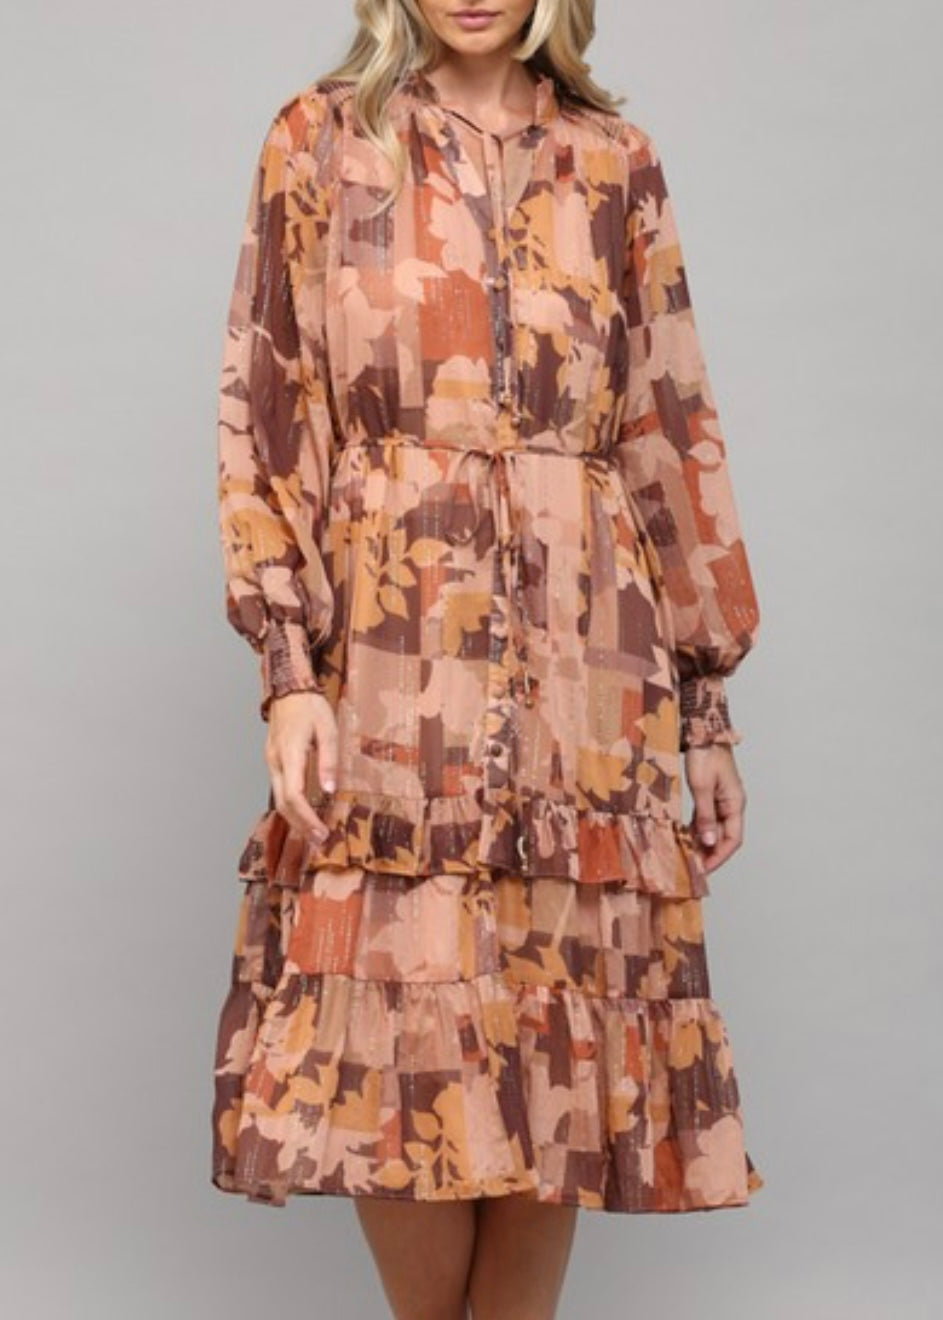 Brown Abstract Print Button Front Dress